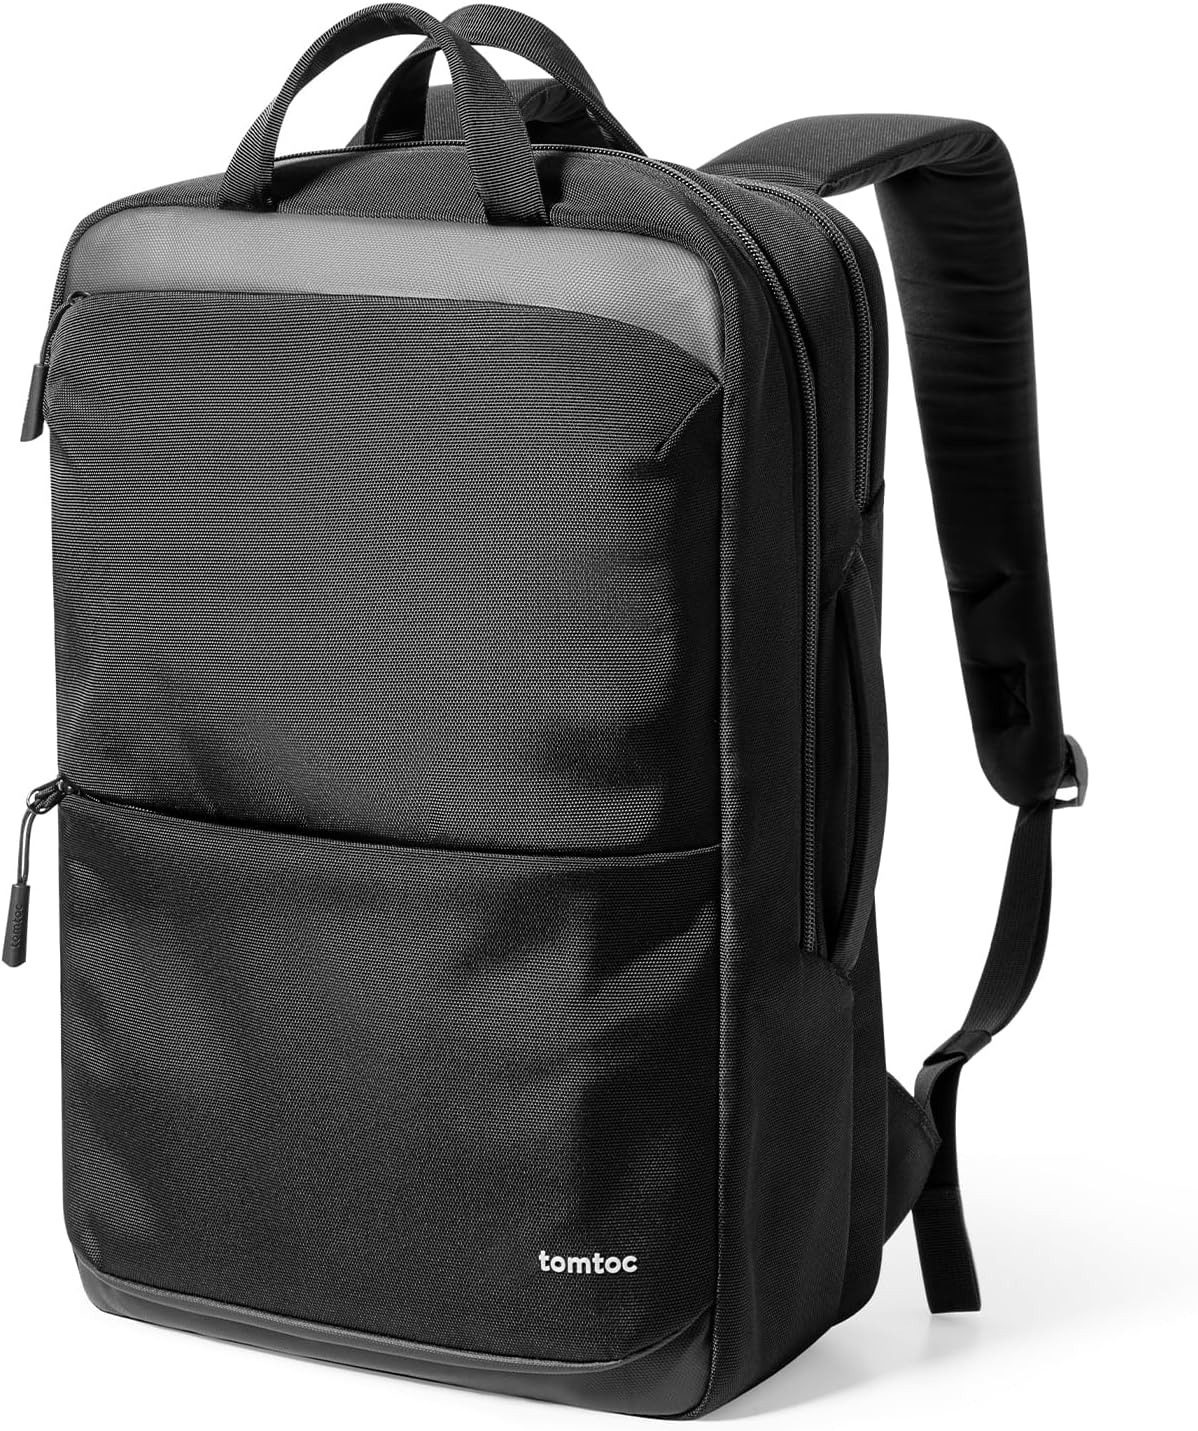 17.3-Inch Protective Laptop Backpack for Business Office, Travel Commuter Bac...